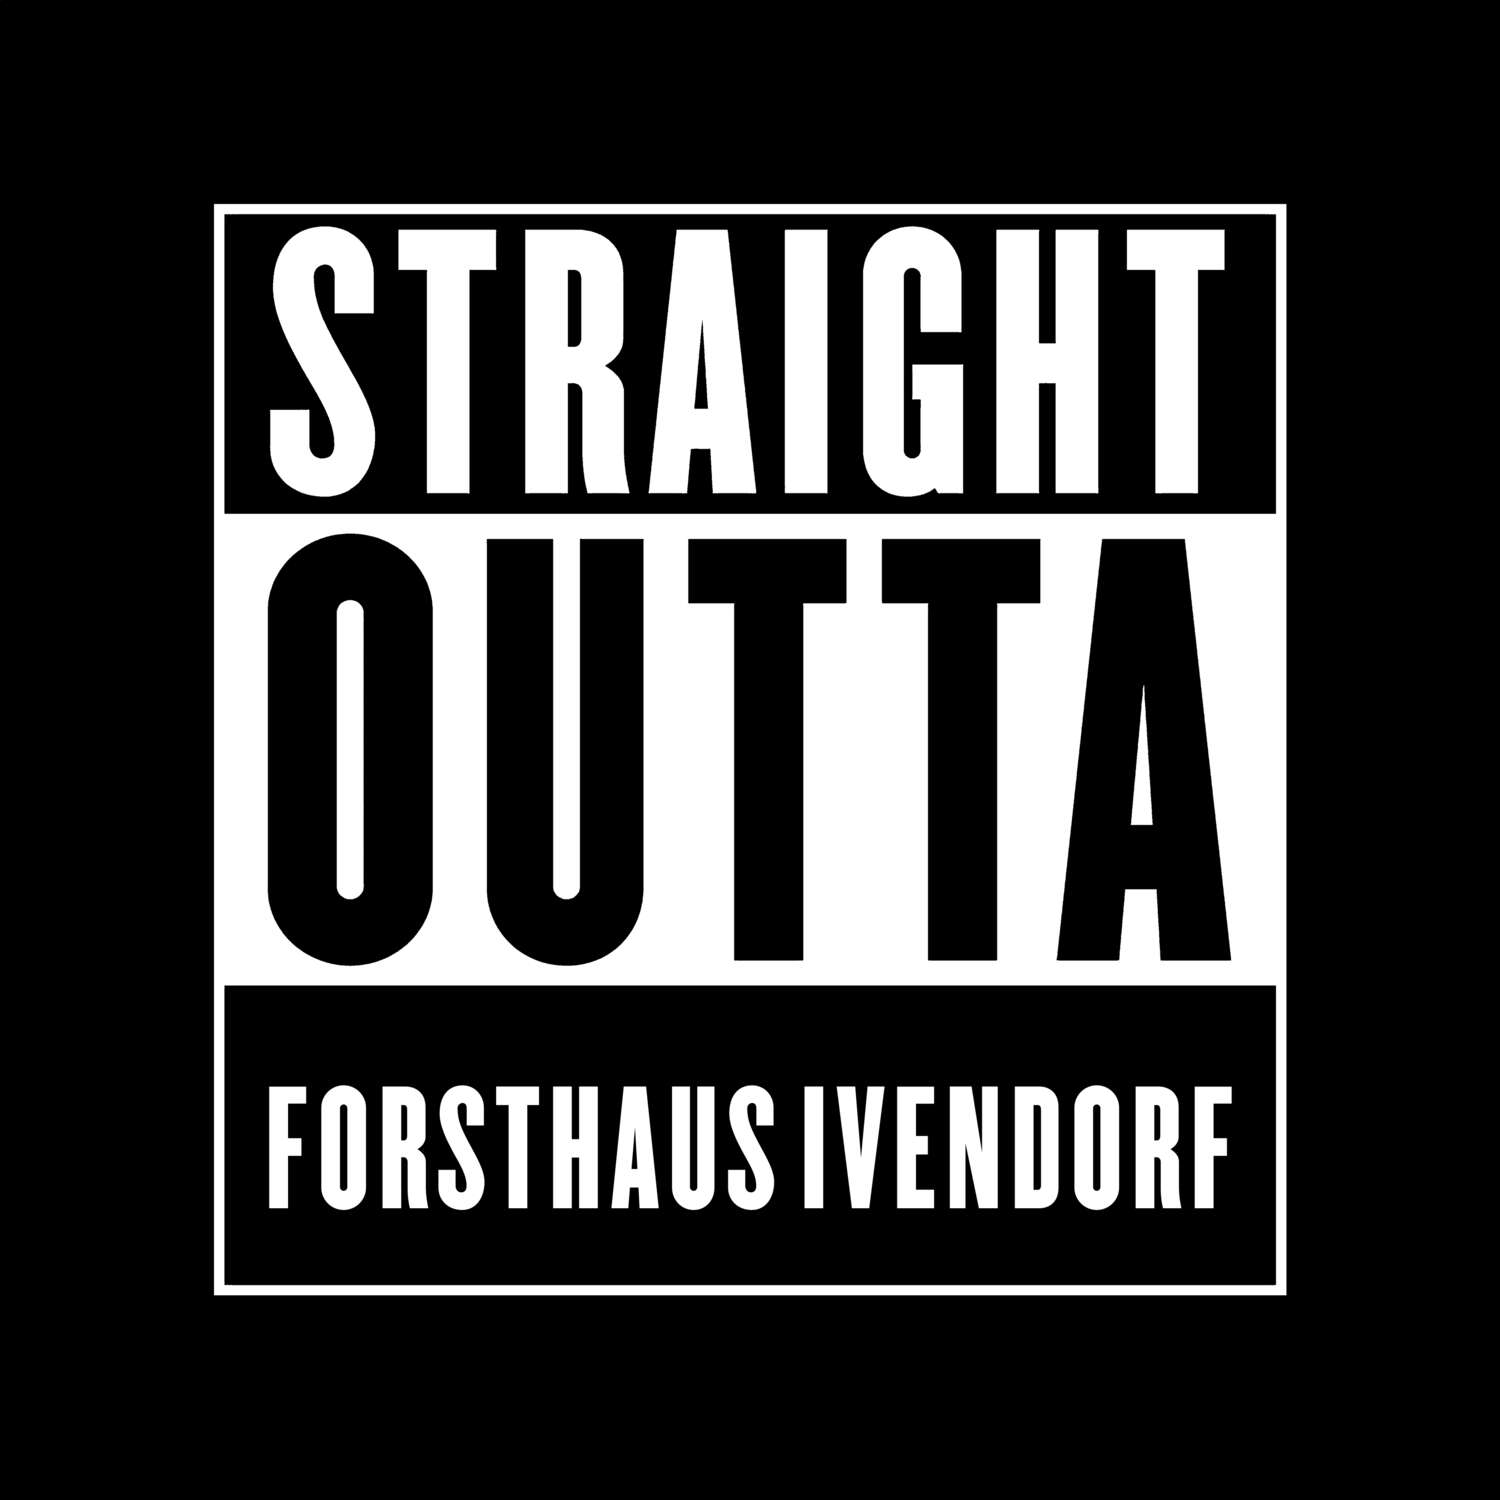 Forsthaus Ivendorf T-Shirt »Straight Outta«